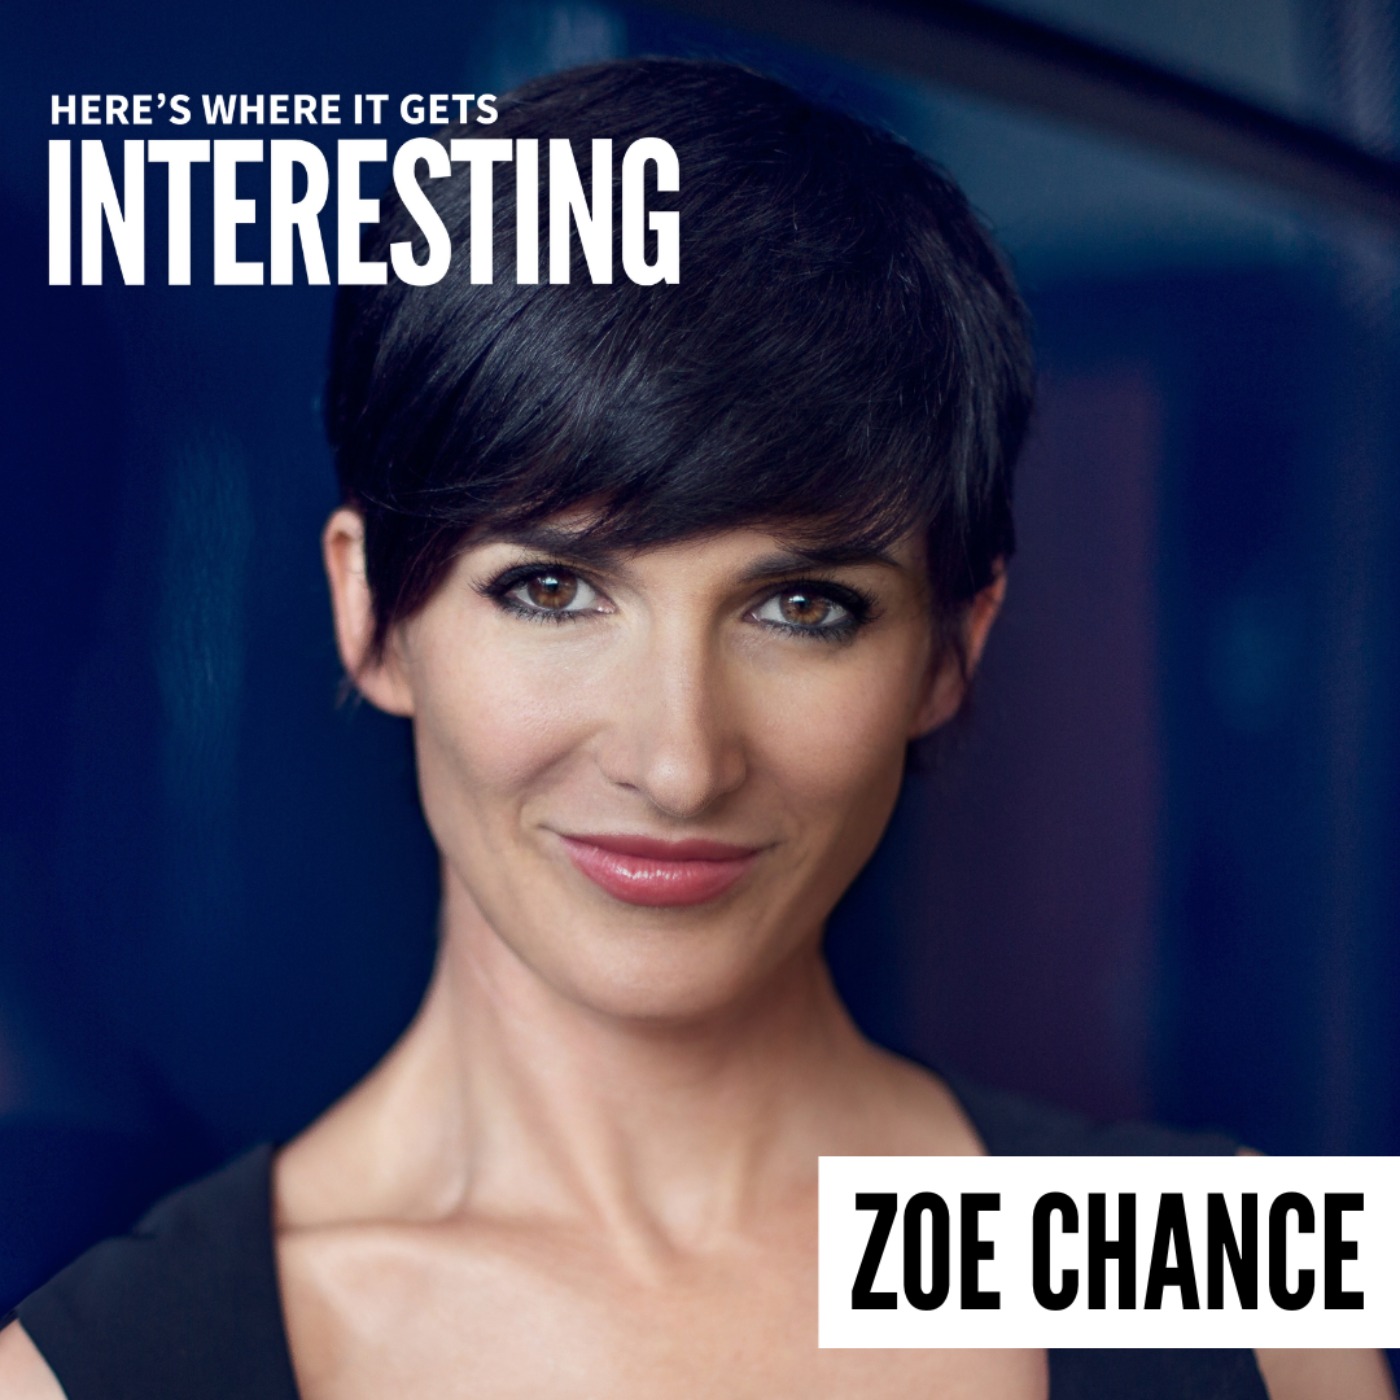 Influence is Your Superpower with Zoe Chance